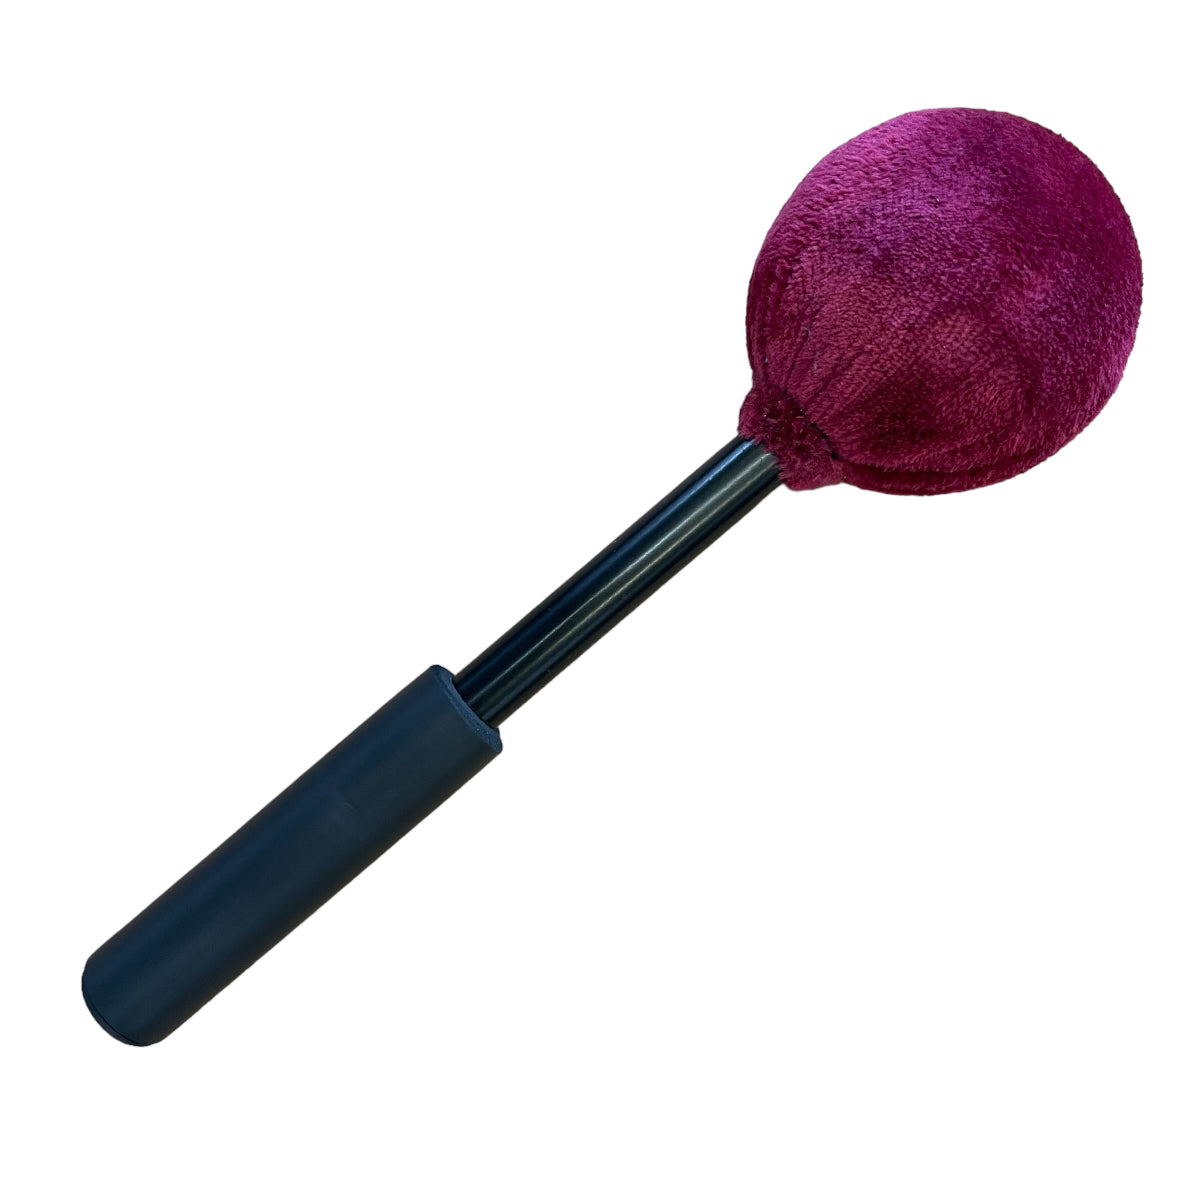 Grotta Sonora Large Gong Mallets